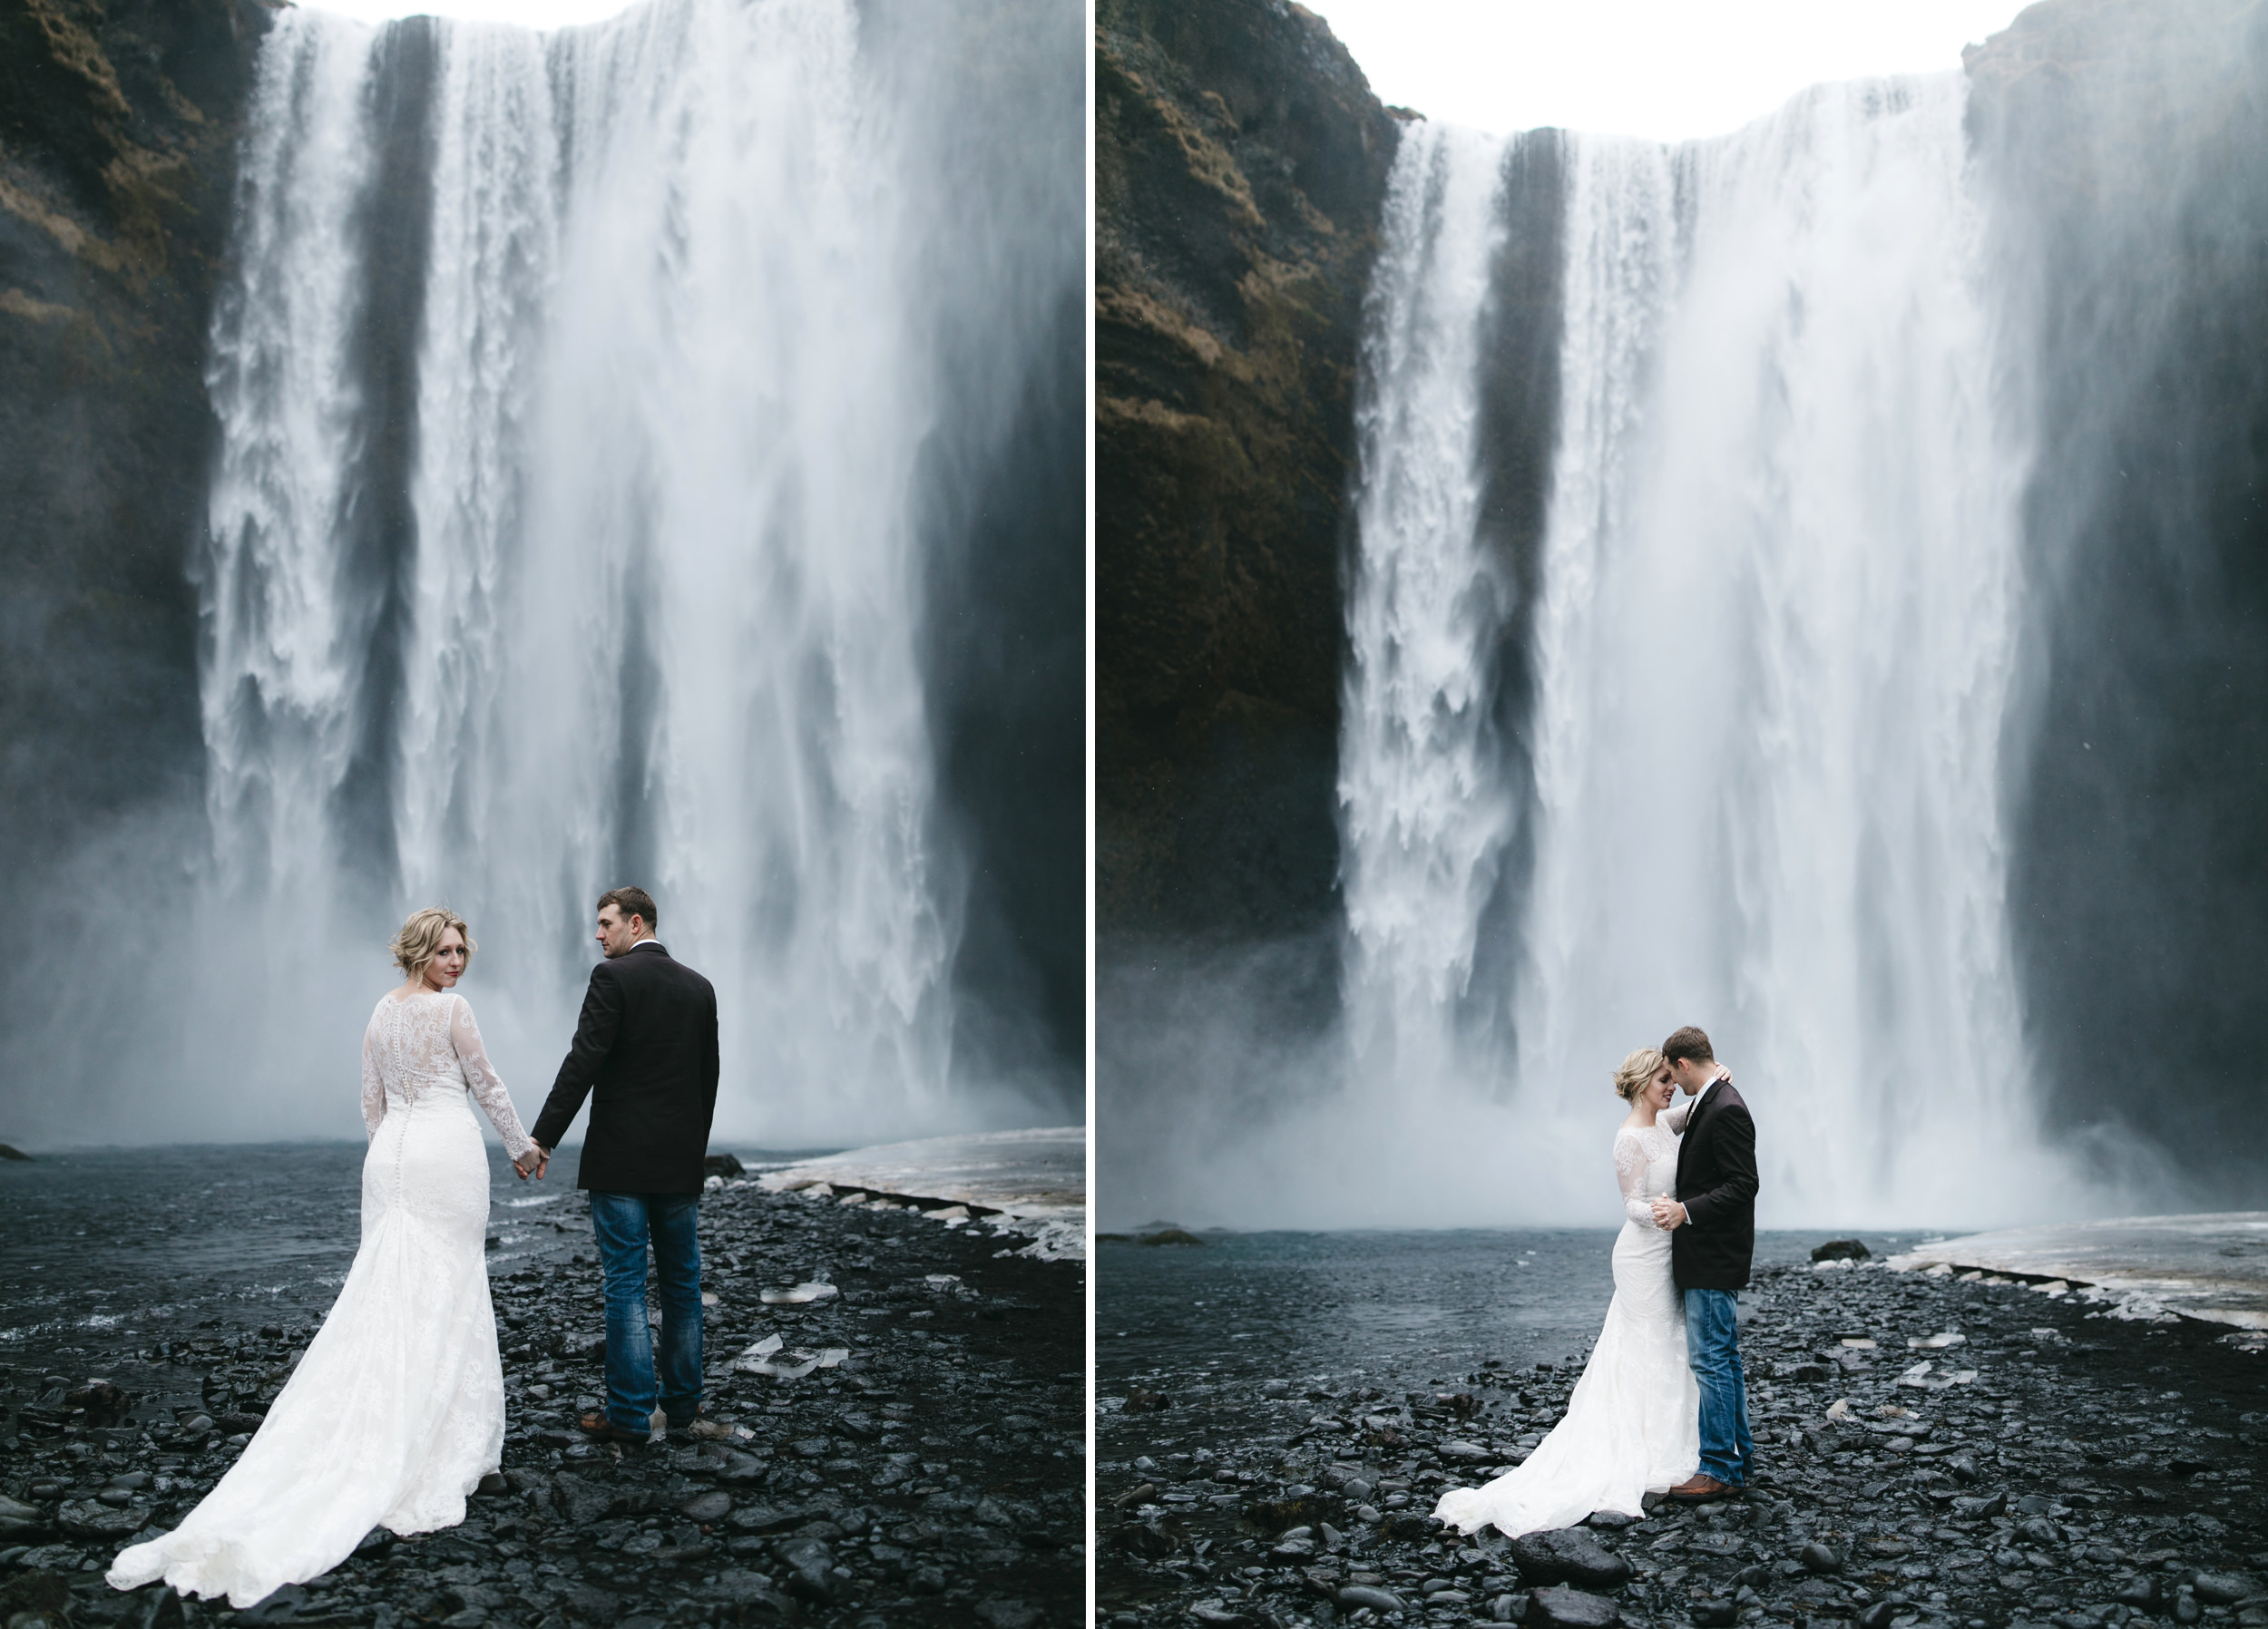 A couple goes to Skogafoss to elope in front of a waterfall with Iceland Elopement Photographers Colby and Jess as their witnesses.